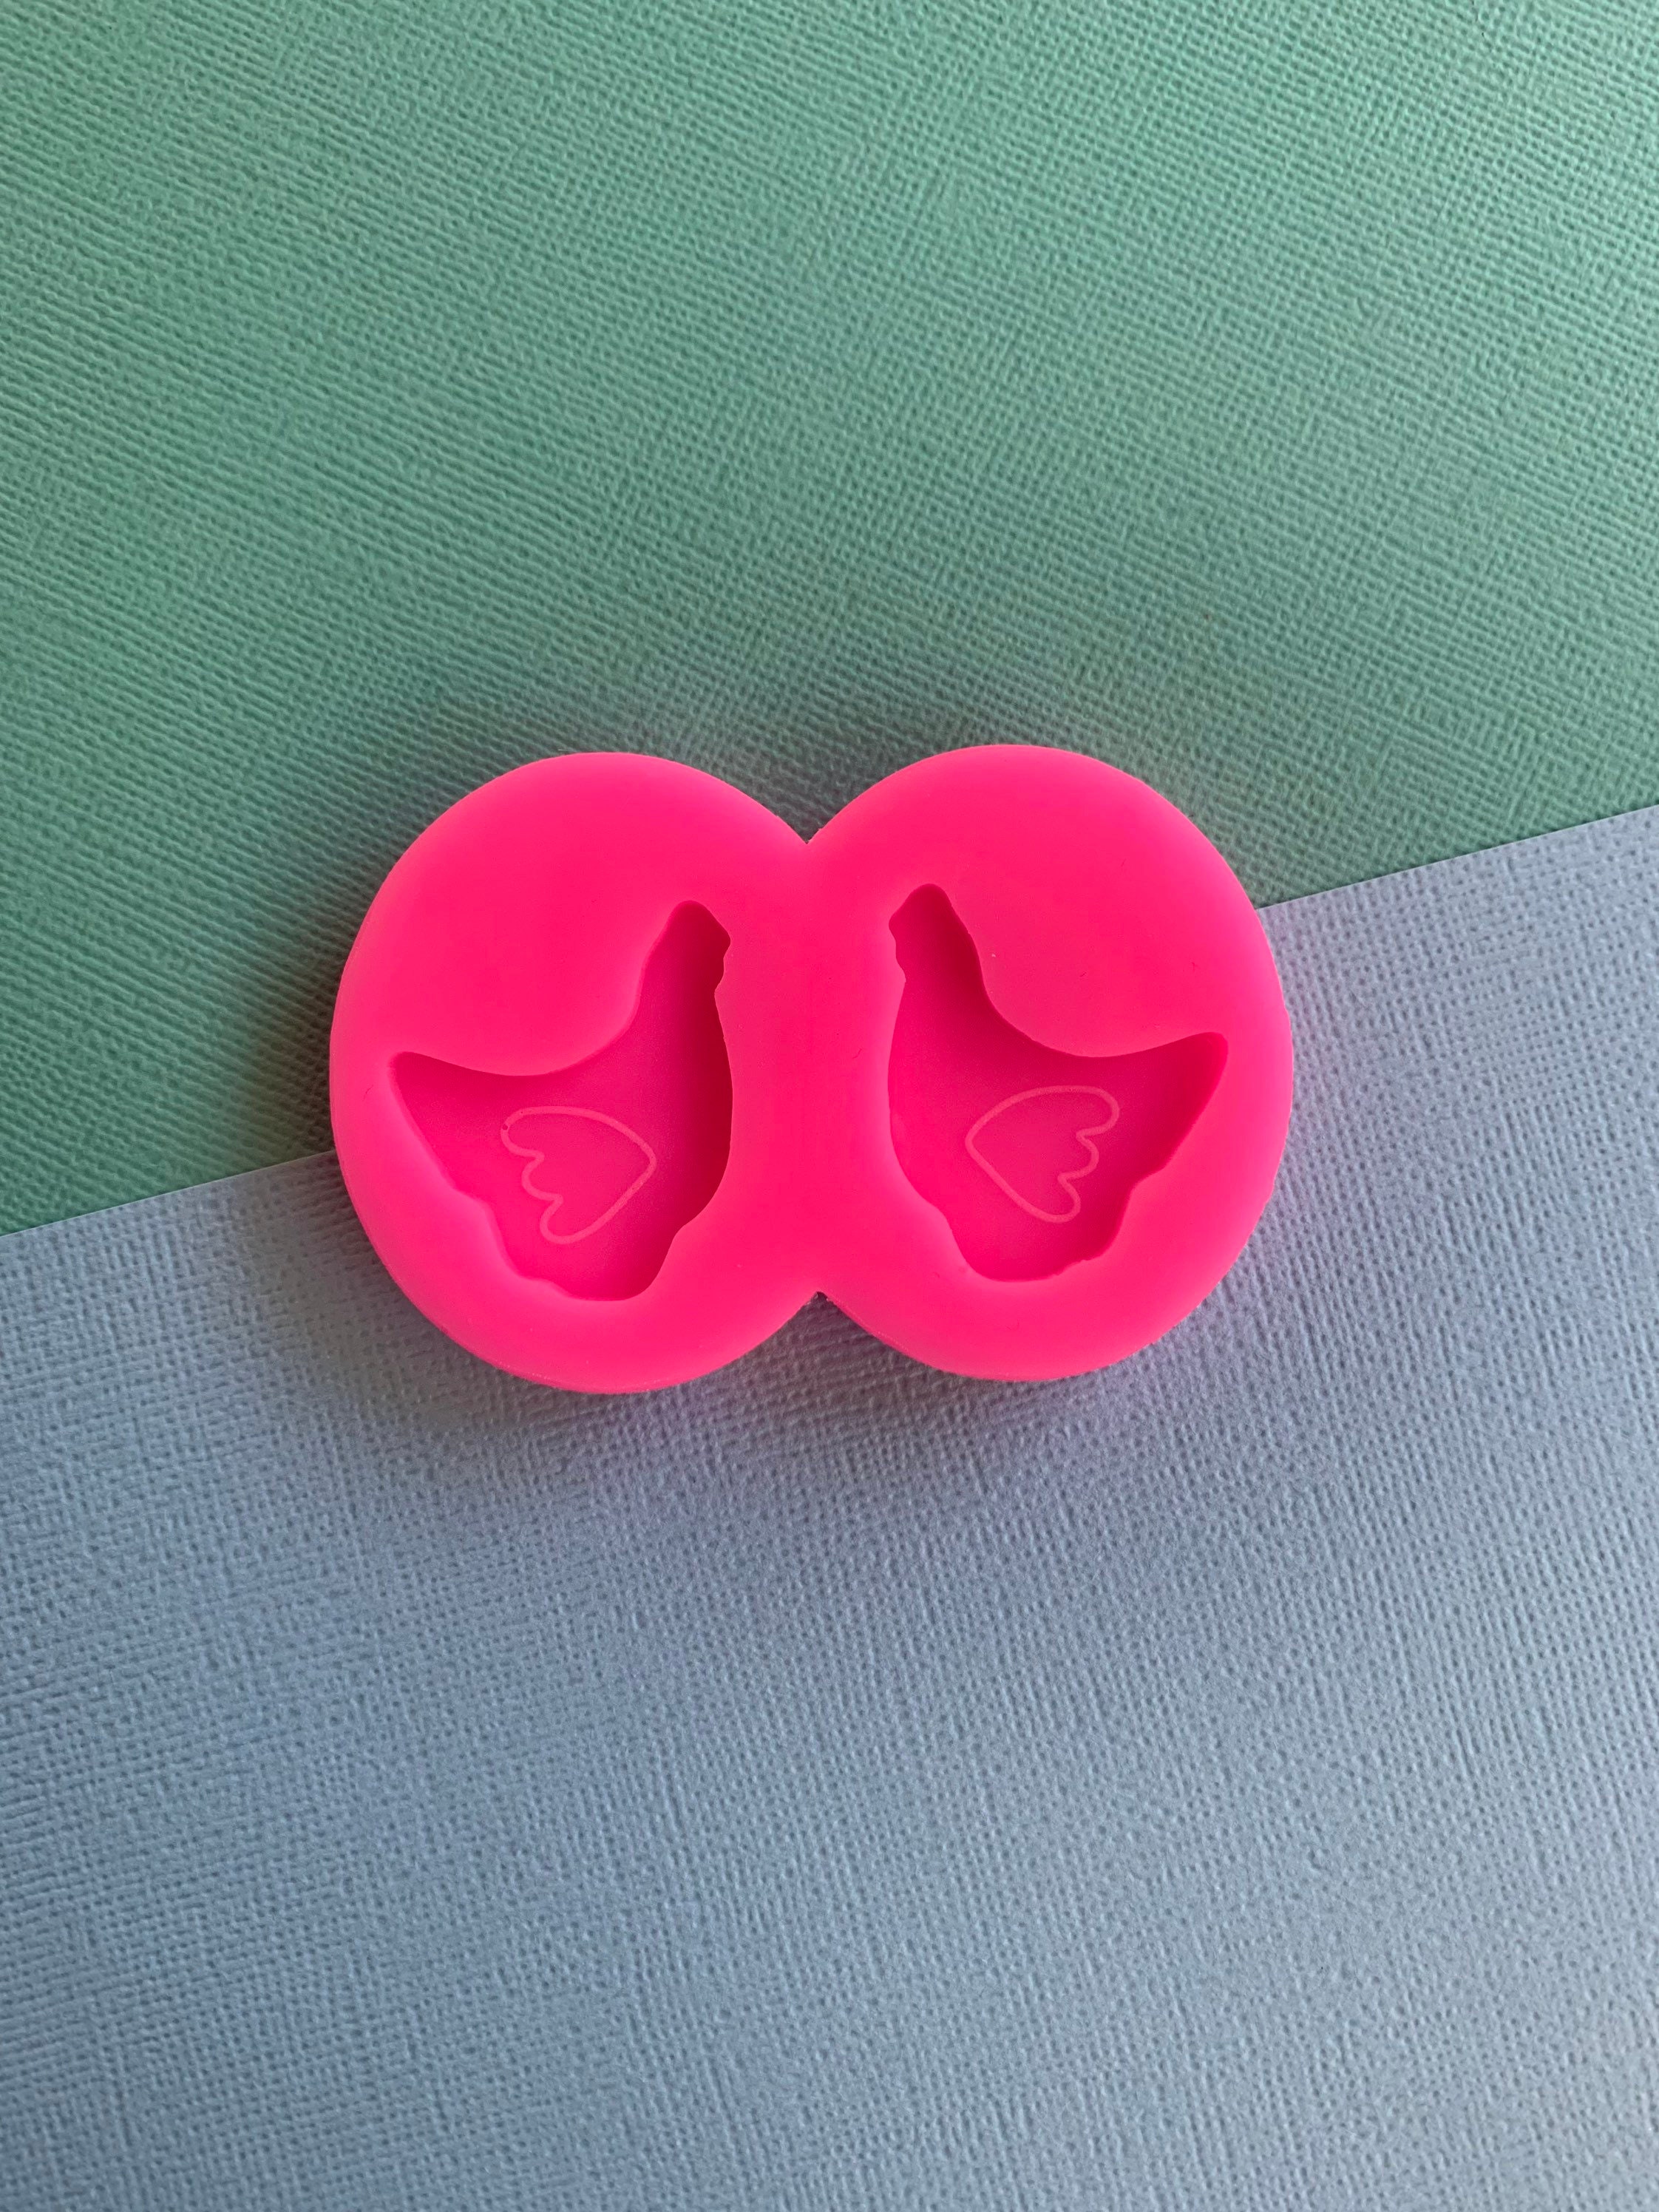 16 pieces 10mm Circle Silicone Mold/Mould, Silicone Mold, Resin Mould,  Earring Moulds, Earring Mold